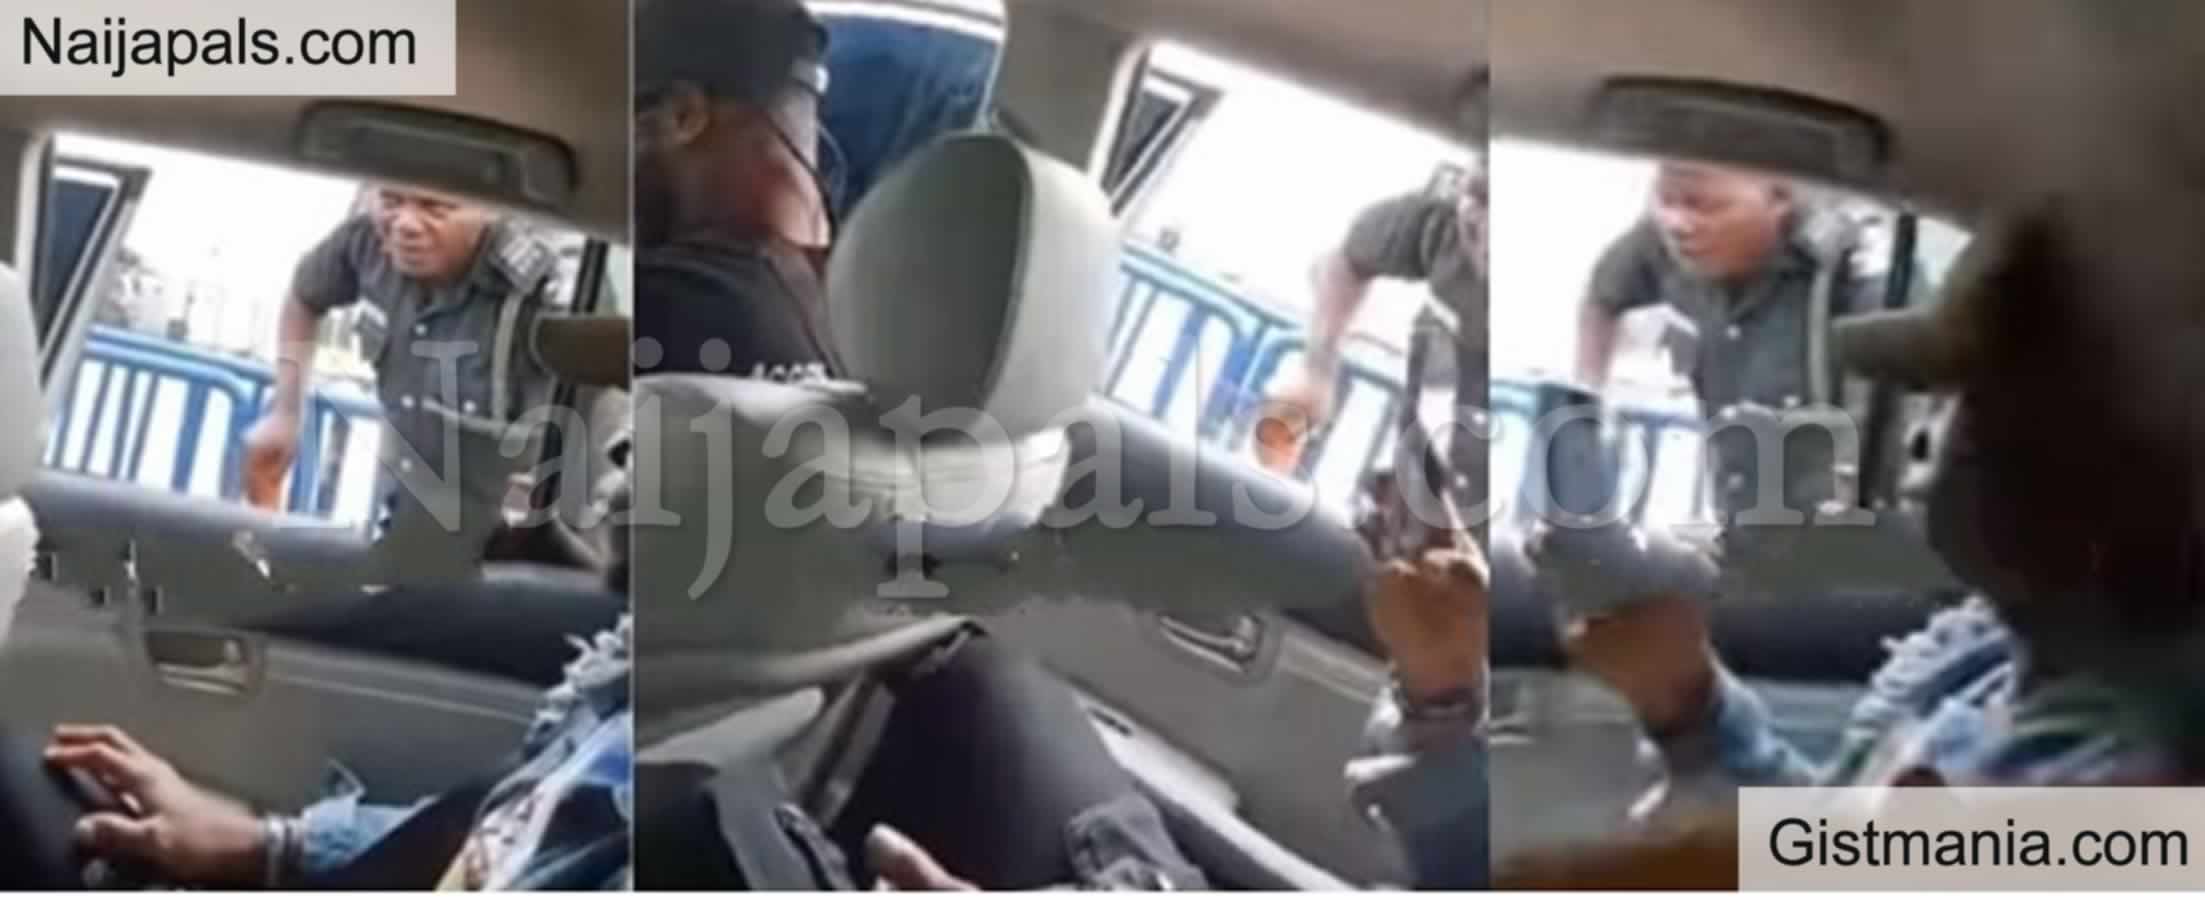 <img alt='.' class='lazyload' data-src='https://img.gistmania.com/emot/video.gif' /> <b>We Contributed Money To Buy This Car - Young Men Tells Nigerian Police</b> Who Stopped Them (VIDEO)